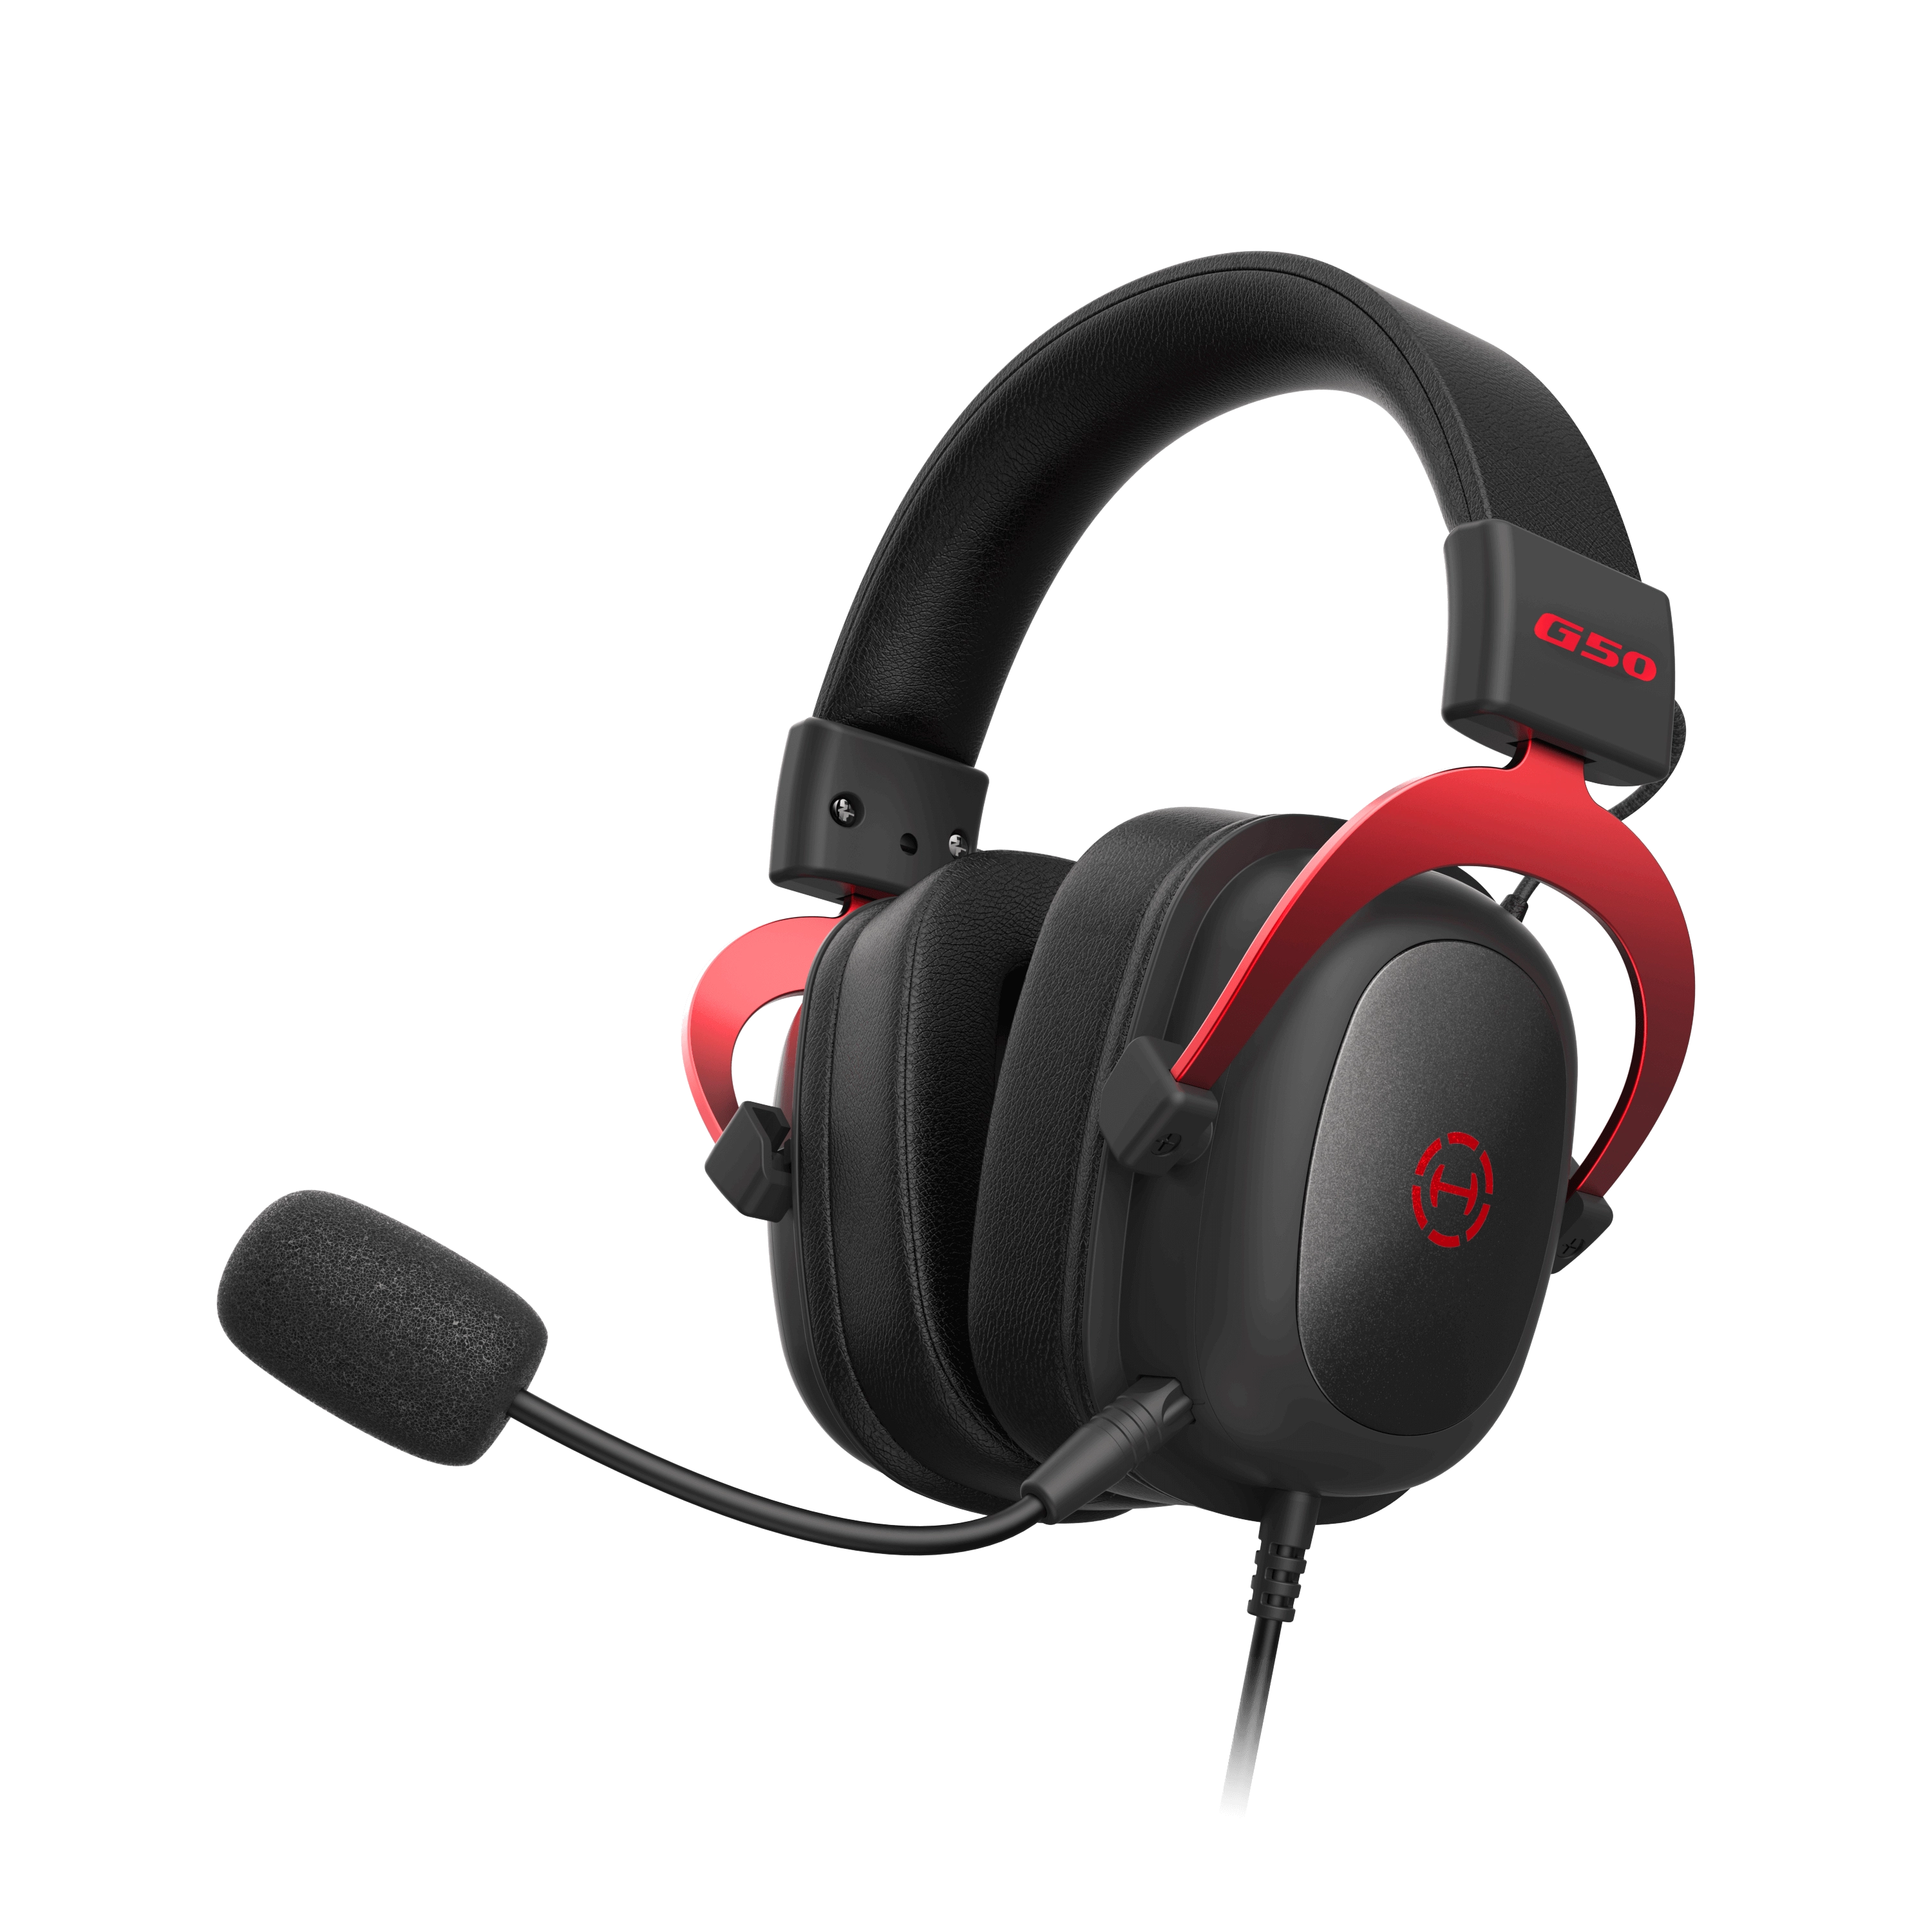 G50 Headset Product Pictures_